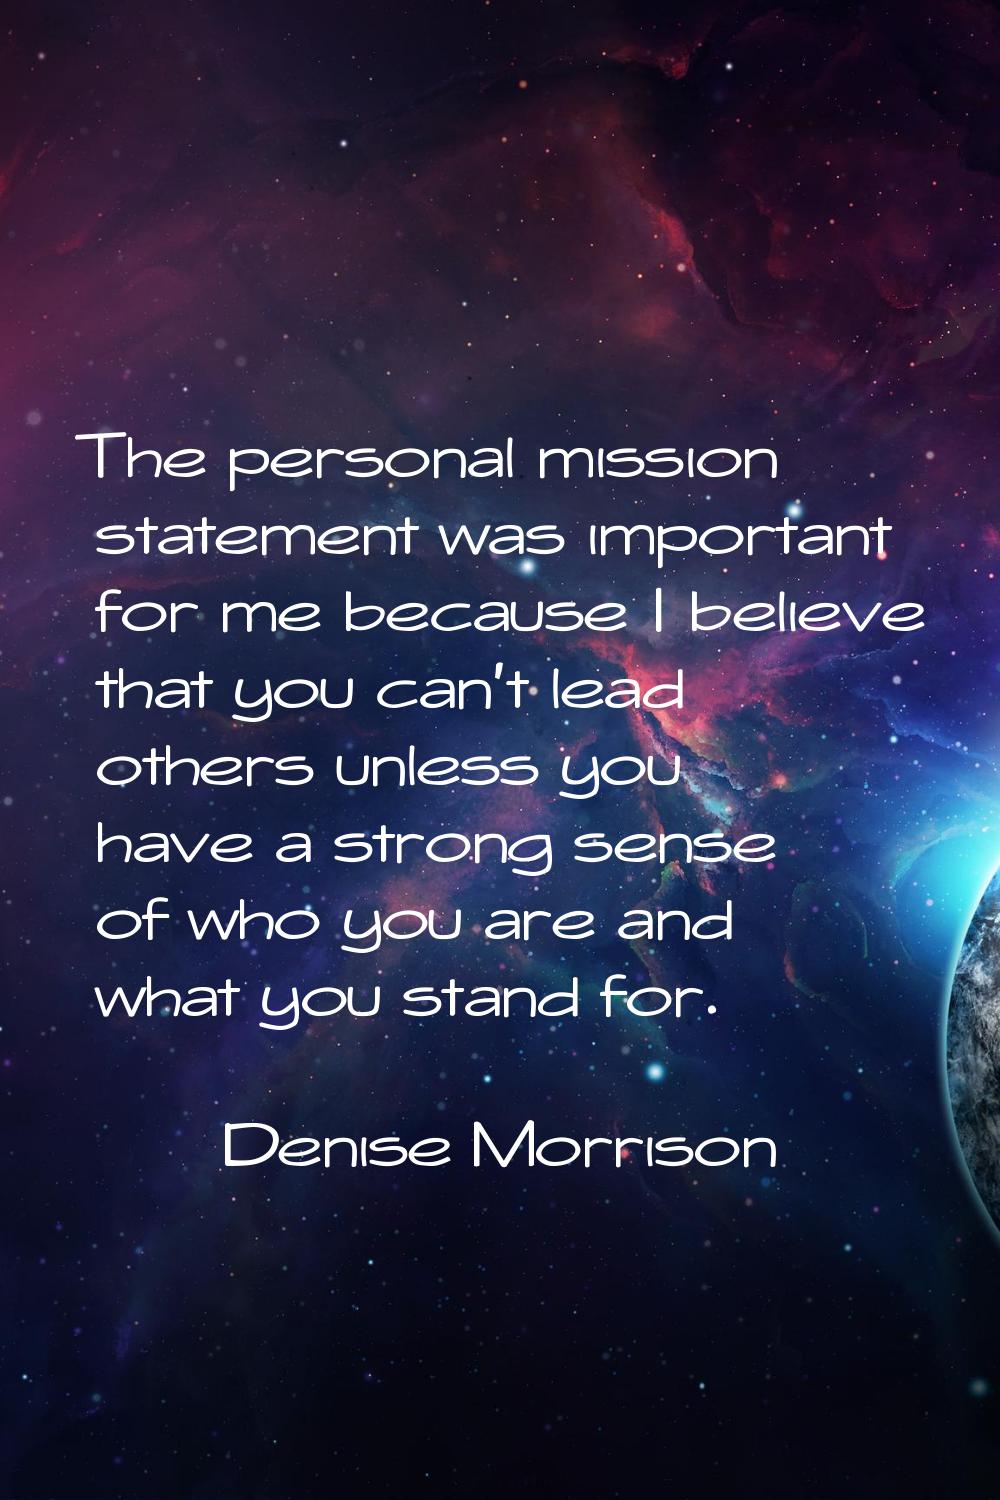 The personal mission statement was important for me because I believe that you can't lead others un